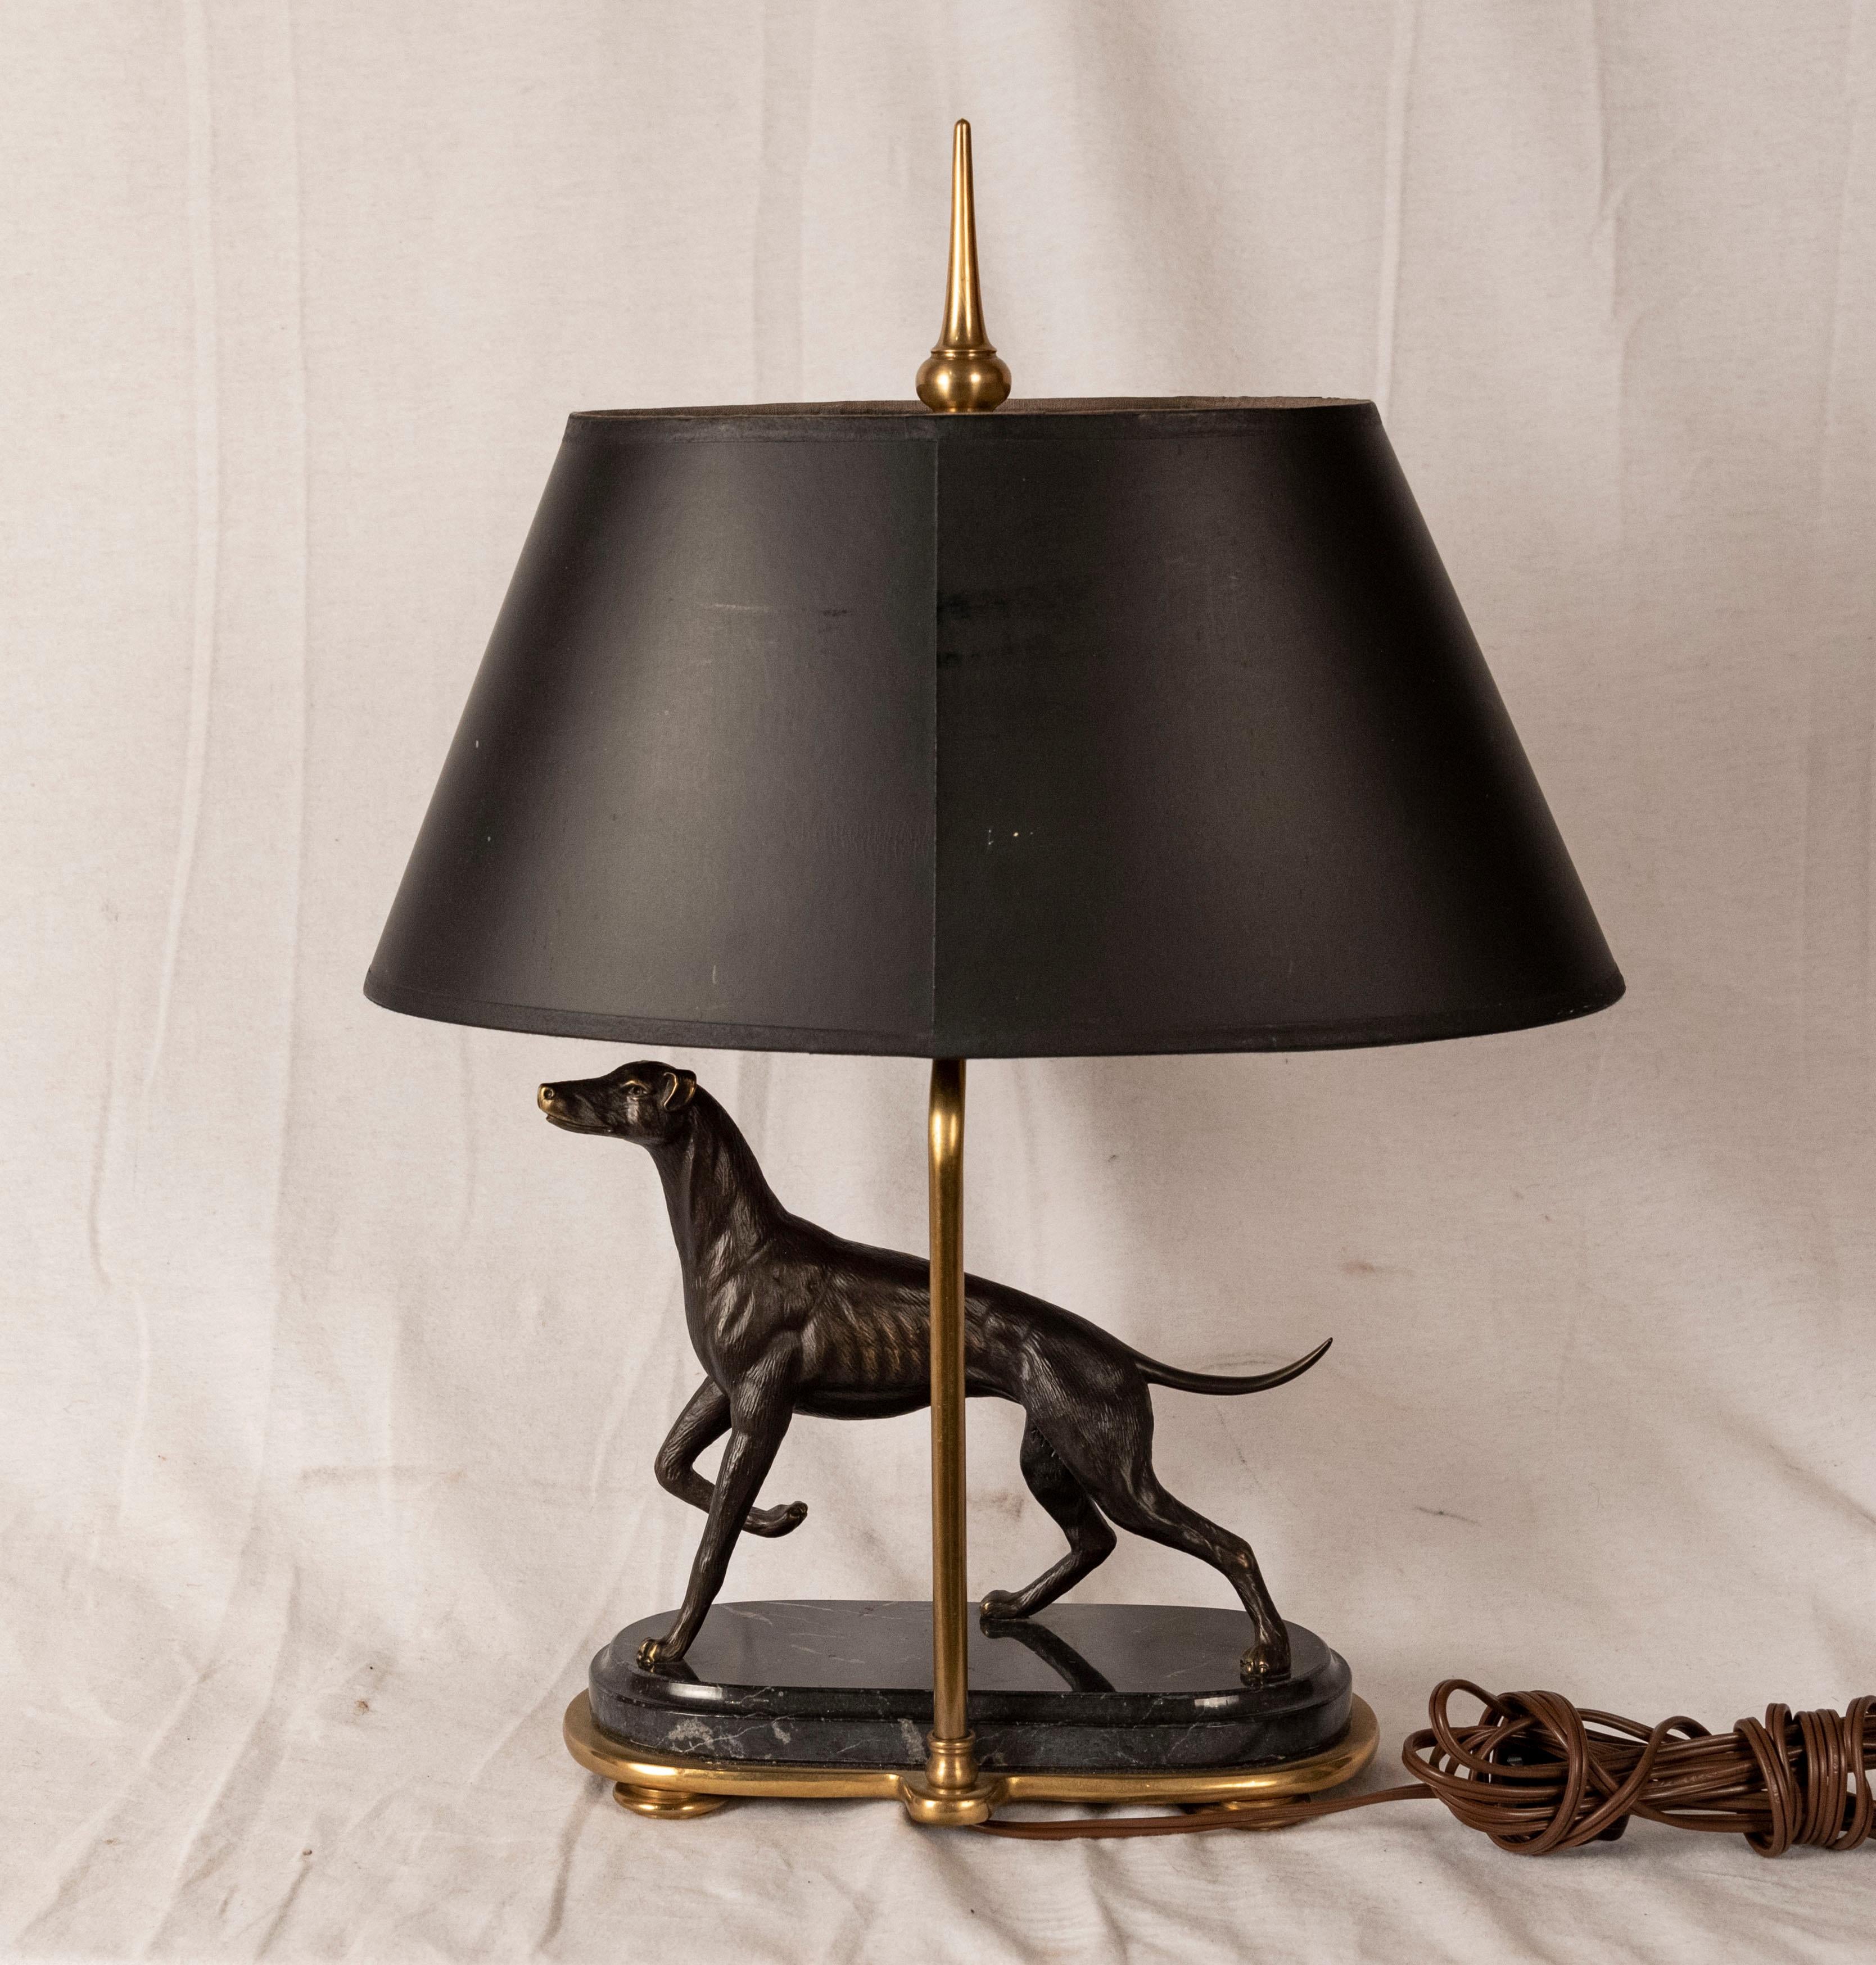 Bronze Greyhound sculpture lamp. Bronze sculpture of a greyhound with one paw raised, on a marble and bronze base, fitted as a lamp, American, 20th century.

Measures: 20 x 14 x 4 in.